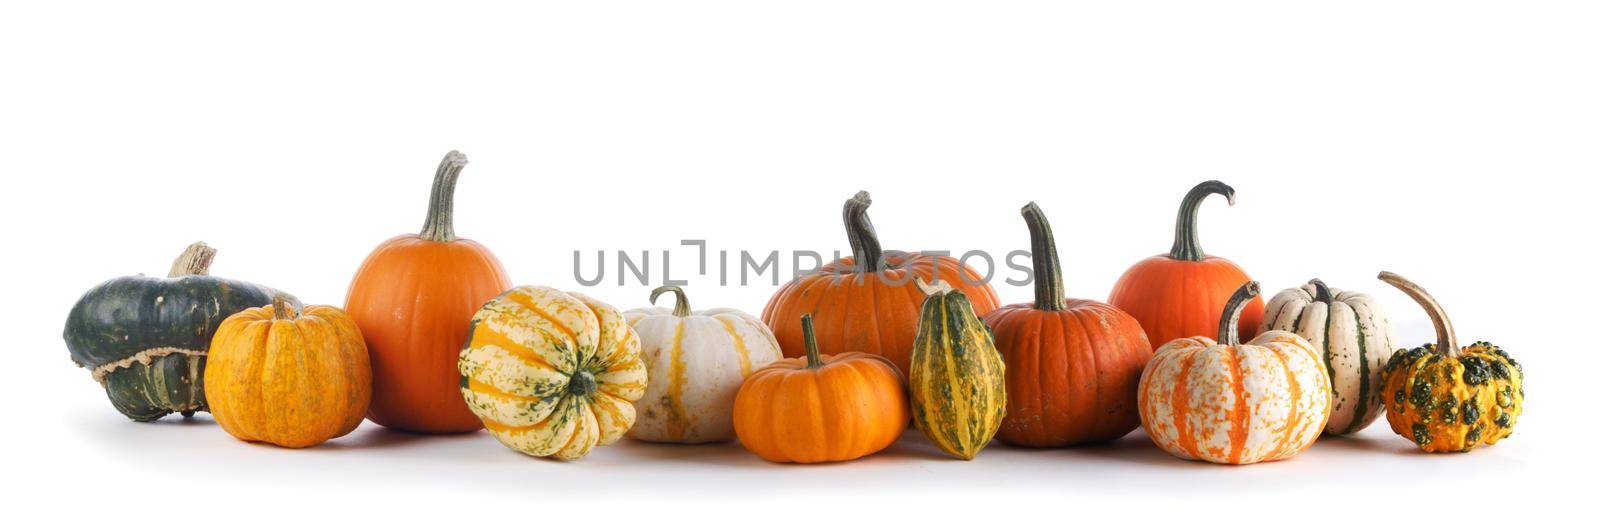 Many various pumpkins on white by Yellowj